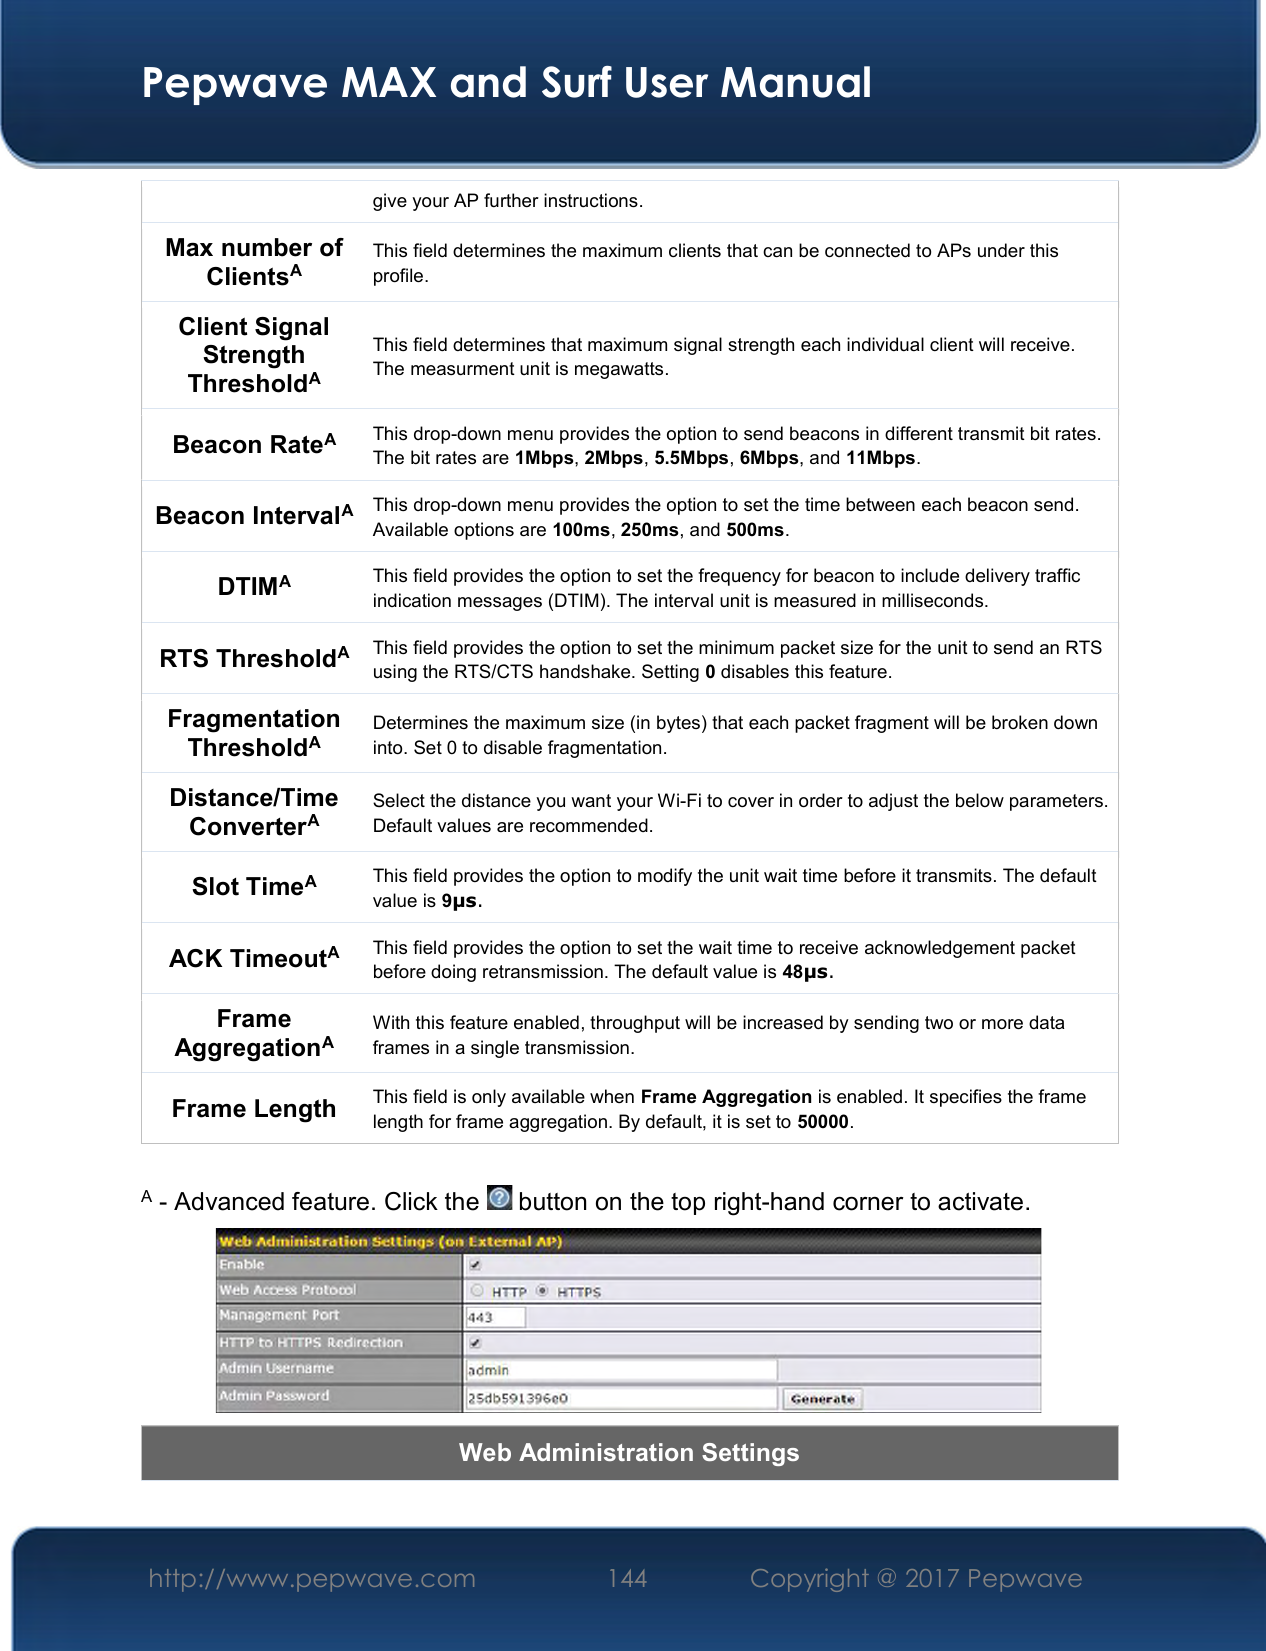  Pepwave MAX and Surf User Manual http://www.pepwave.com  144    Copyright @ 2017 Pepwave   give your AP further instructions. Max number of ClientsA This field determines the maximum clients that can be connected to APs under this profile.  Client Signal Strength ThresholdA This field determines that maximum signal strength each individual client will receive. The measurment unit is megawatts. Beacon RateA This drop-down menu provides the option to send beacons in different transmit bit rates. The bit rates are 1Mbps, 2Mbps, 5.5Mbps, 6Mbps, and 11Mbps. Beacon IntervalA This drop-down menu provides the option to set the time between each beacon send. Available options are 100ms, 250ms, and 500ms. DTIMA This field provides the option to set the frequency for beacon to include delivery traffic indication messages (DTIM). The interval unit is measured in milliseconds. RTS ThresholdA This field provides the option to set the minimum packet size for the unit to send an RTS using the RTS/CTS handshake. Setting 0 disables this feature. Fragmentation ThresholdA Determines the maximum size (in bytes) that each packet fragment will be broken down into. Set 0 to disable fragmentation. Distance/Time ConverterA Select the distance you want your Wi-Fi to cover in order to adjust the below parameters. Default values are recommended. Slot TimeA This field provides the option to modify the unit wait time before it transmits. The default value is 9μs. ACK TimeoutA This field provides the option to set the wait time to receive acknowledgement packet before doing retransmission. The default value is 48μs. Frame AggregationA With this feature enabled, throughput will be increased by sending two or more data frames in a single transmission. Frame Length  This field is only available when Frame Aggregation is enabled. It specifies the frame length for frame aggregation. By default, it is set to 50000.  A - Advanced feature. Click the   button on the top right-hand corner to activate.  Web Administration Settings 